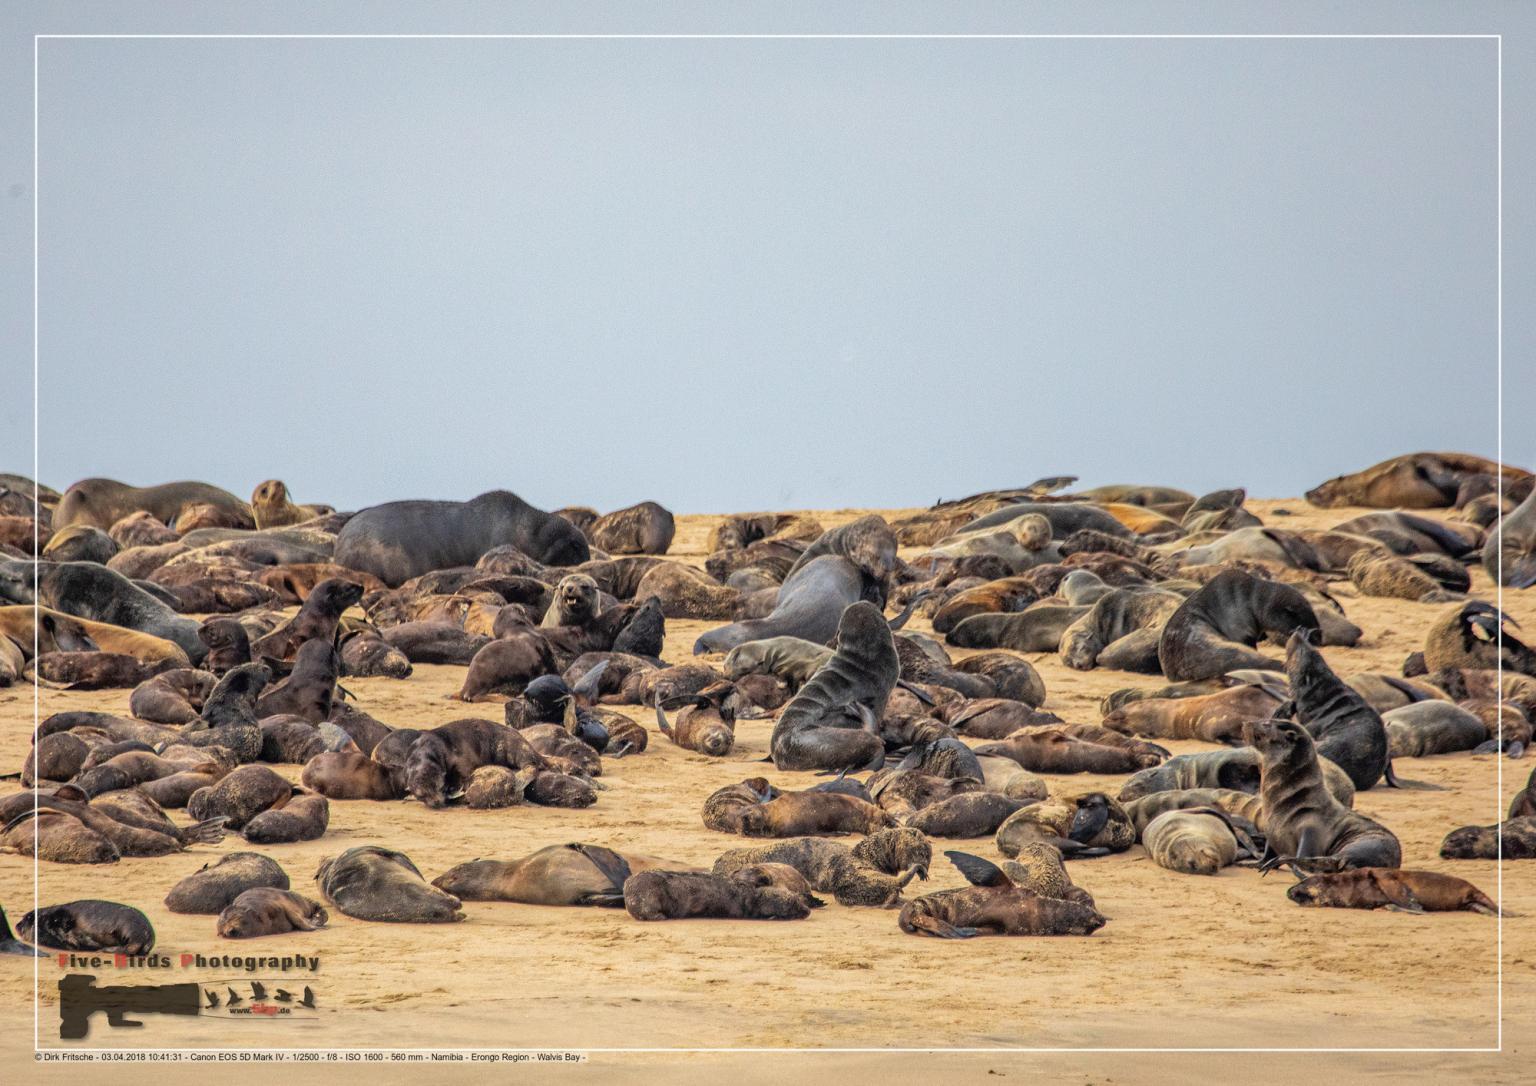 A group of Cape Fur Seals laying on a sandbank at the Atlantic Ocean near Walfis Bay in western Namibia